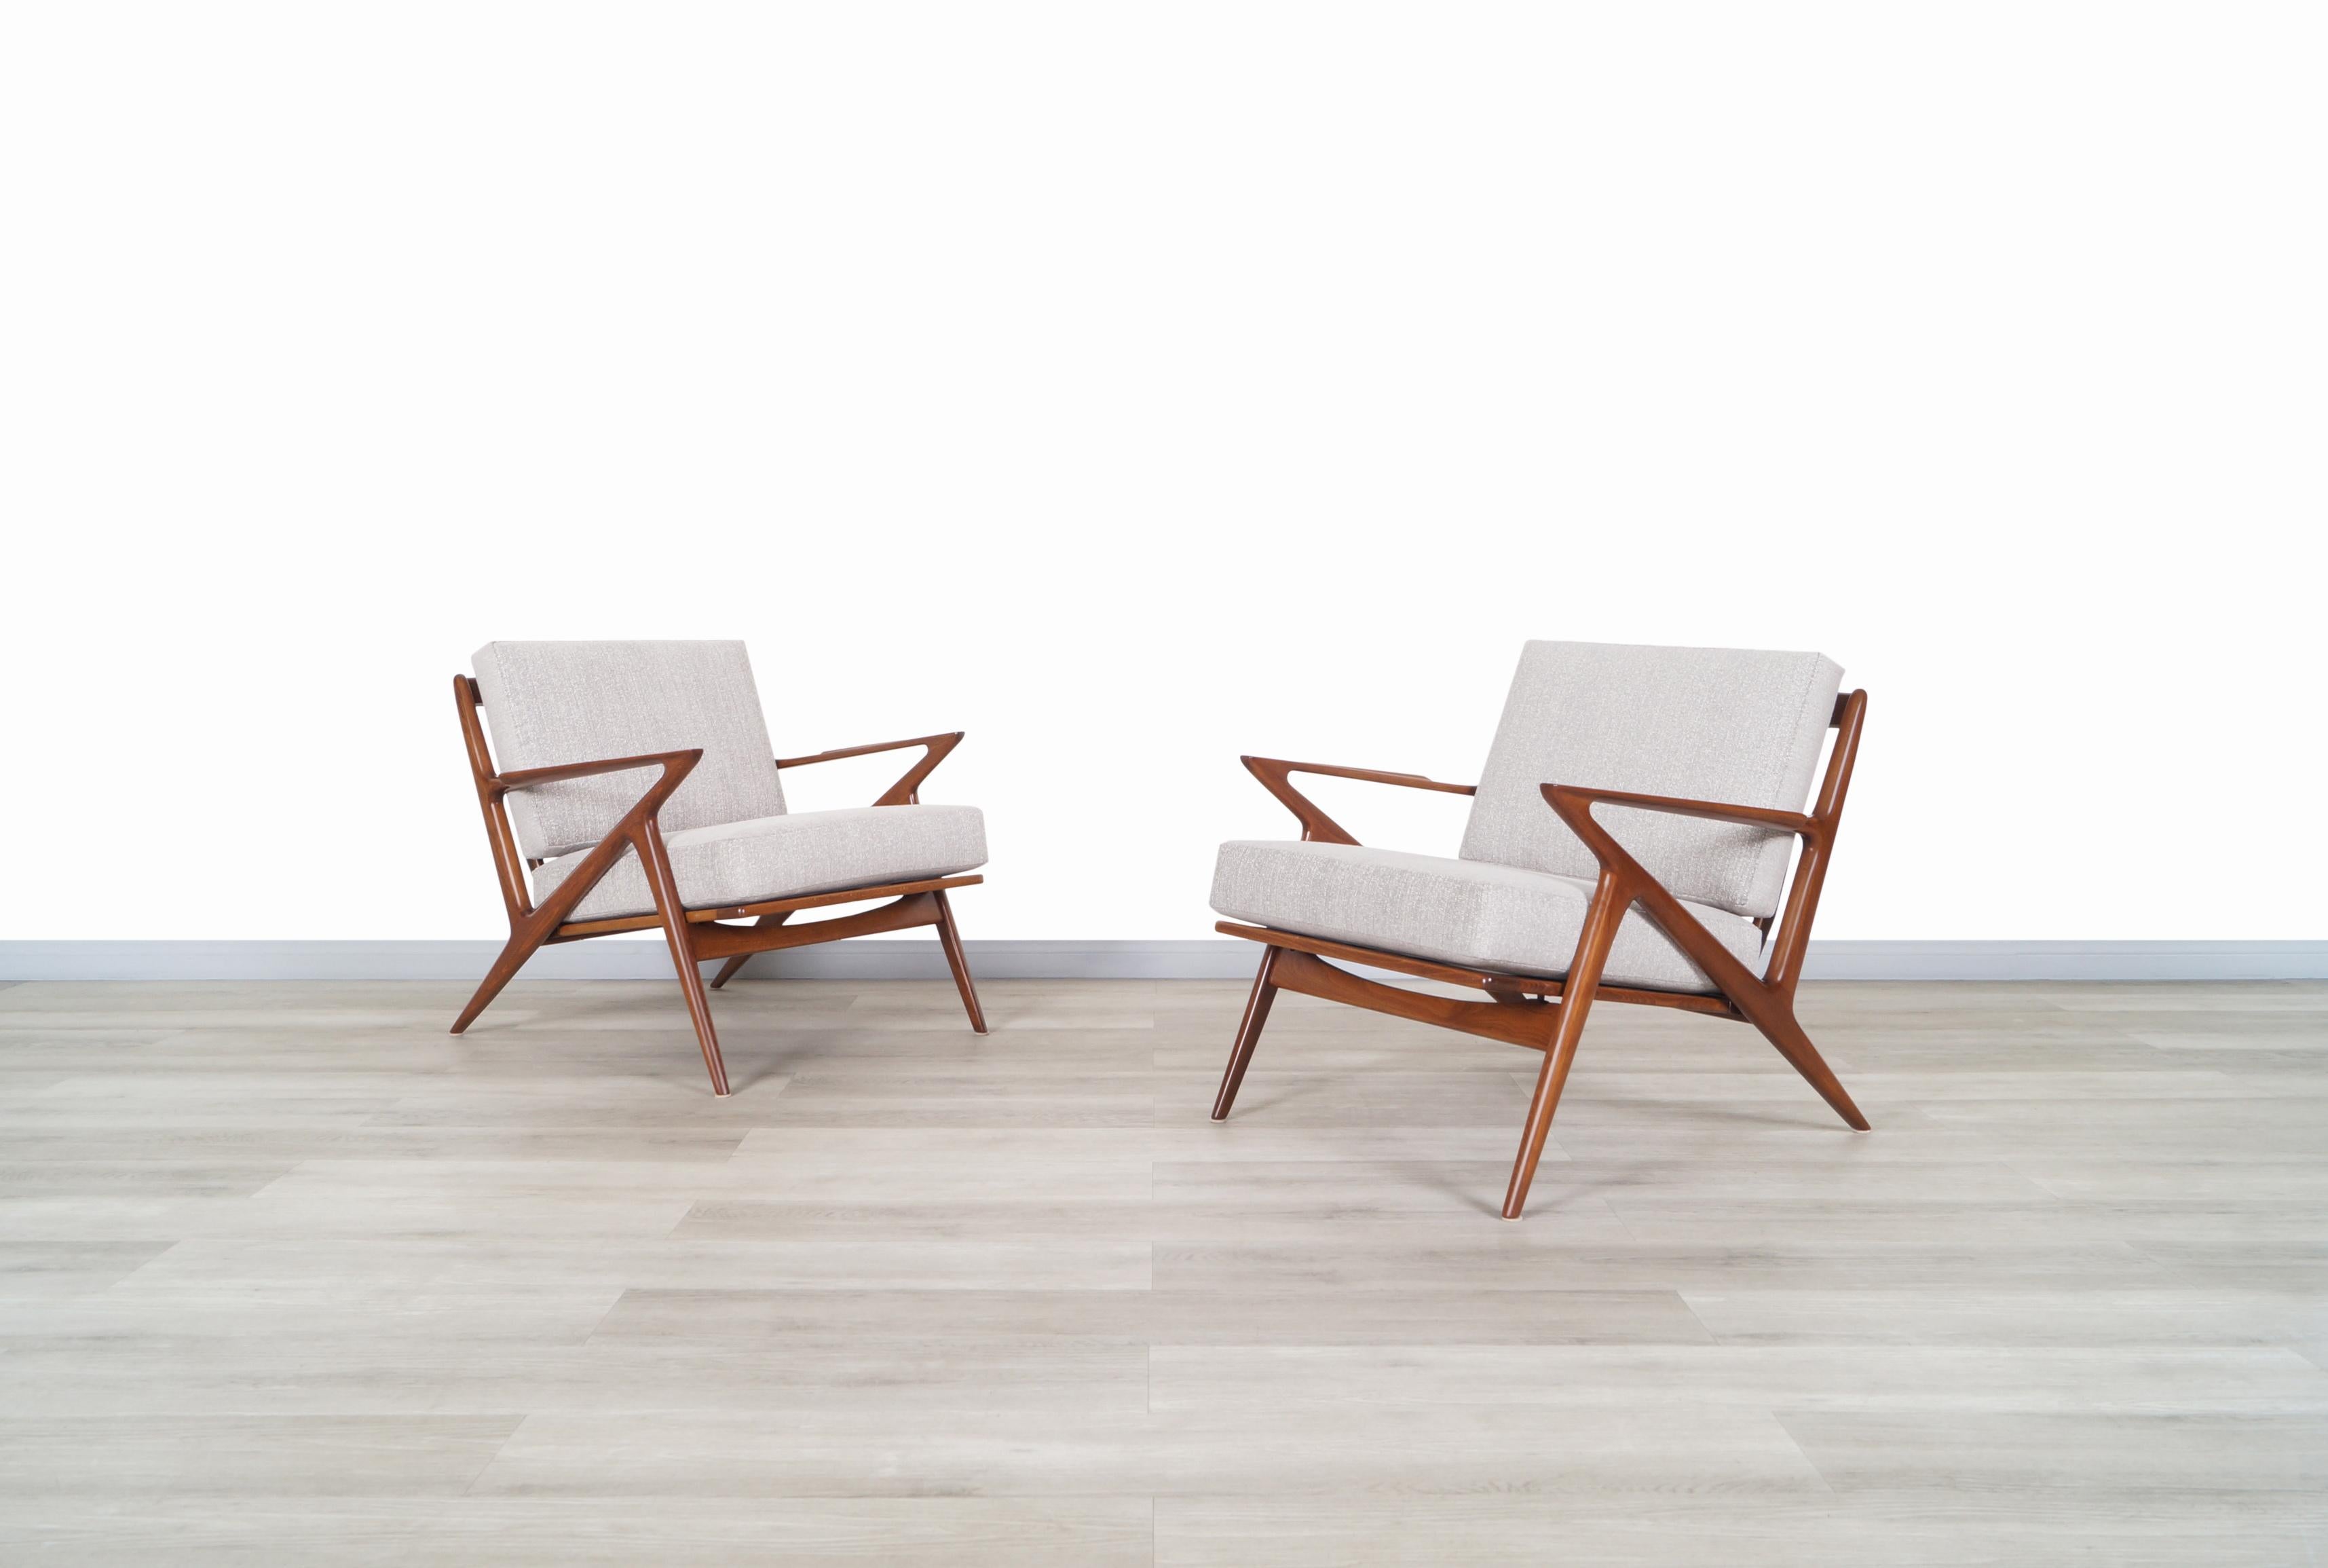 Stunning pair of Danish modern lounge chairs designed by Poul Jensen for Selig in Denmark, circa 1960s. Known as the “Z” chair for its exclusive armrests that connect to the legs and give the illusion of a letter Z. These chairs stand out for the